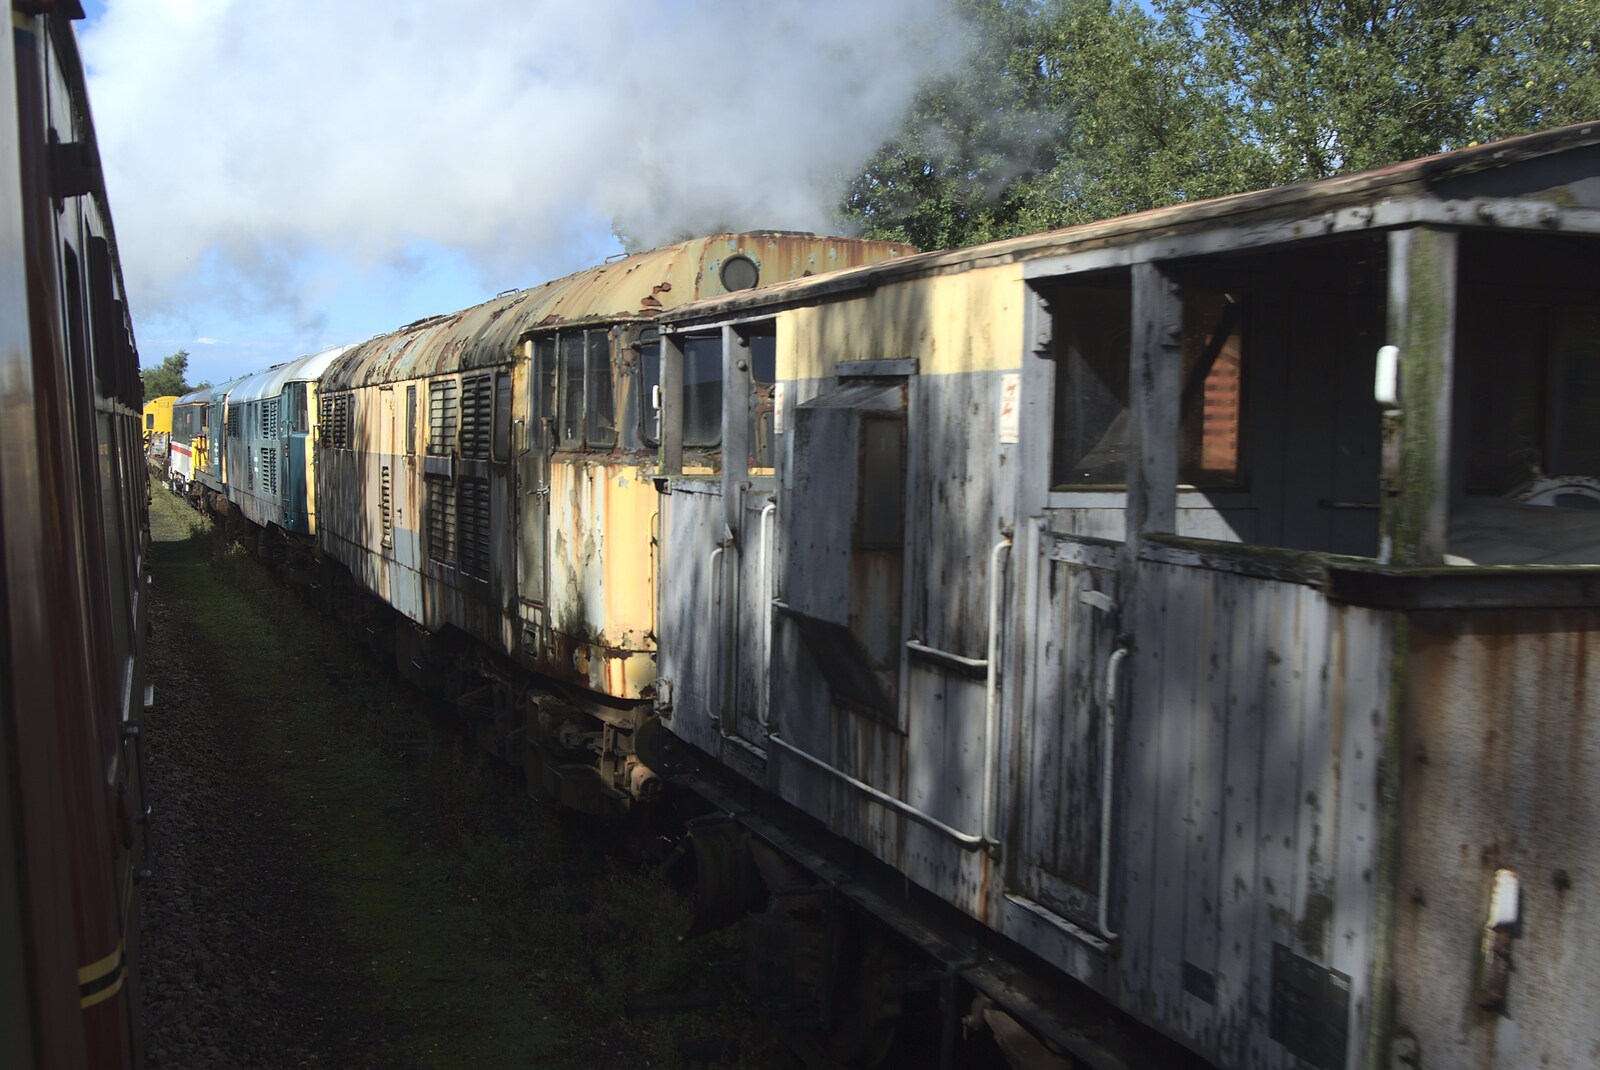 Camping with Trains, Yaxham, Norfolk - 29th August 2010: Some derelict engines